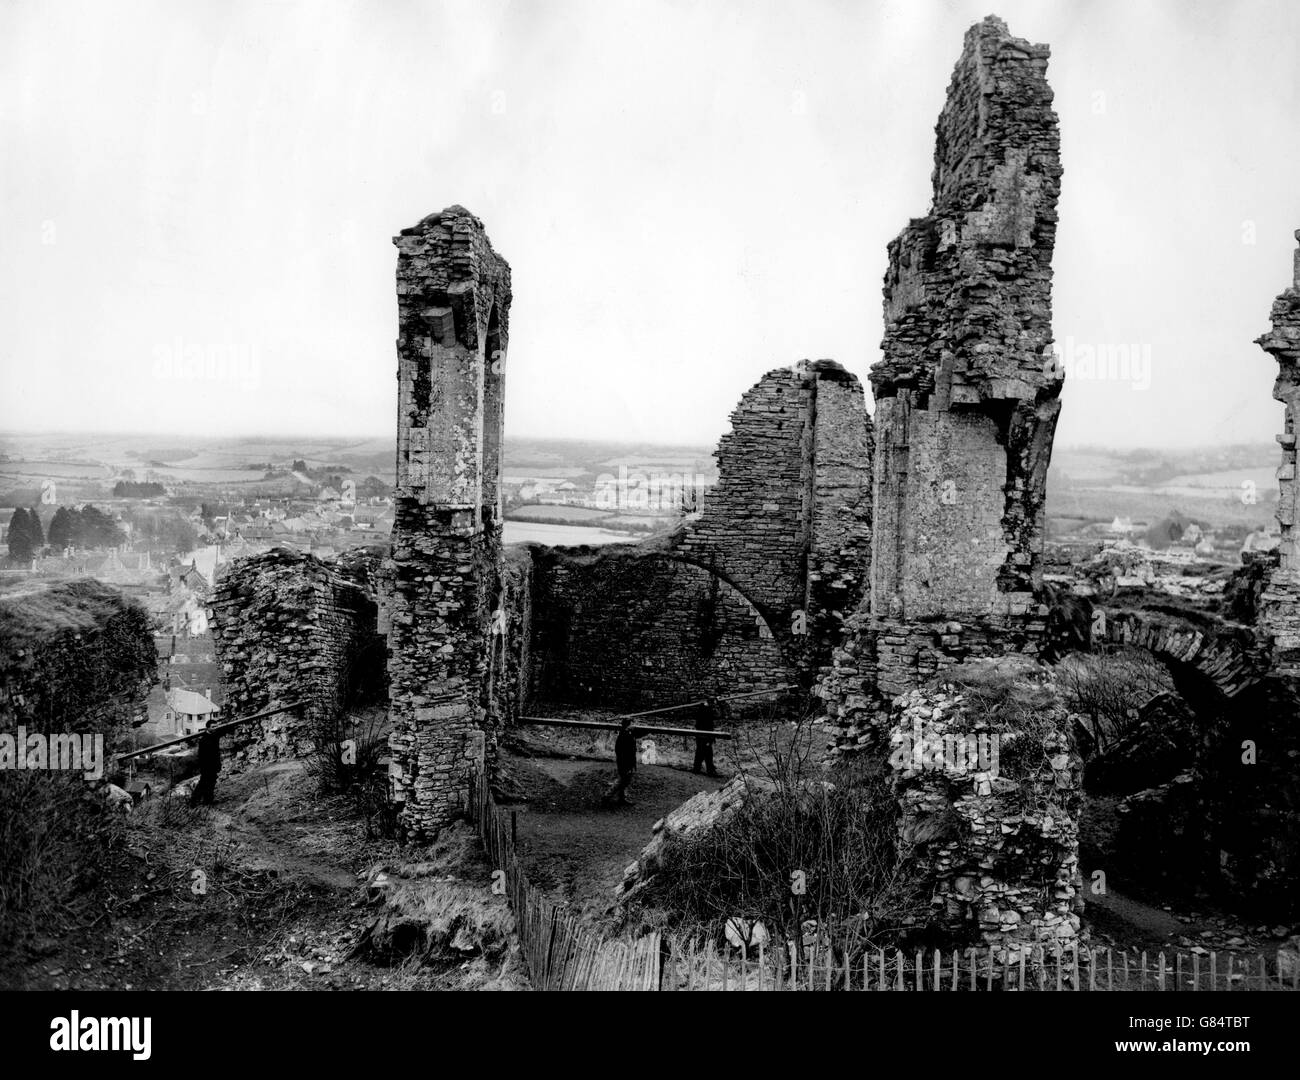 Buildings and Landmarks - Corfe Castle - Dorset - 1959. The ruins of Corfe Castle dominate the countryside. Men carry in equipment for repairs to the castle. Stock Photo